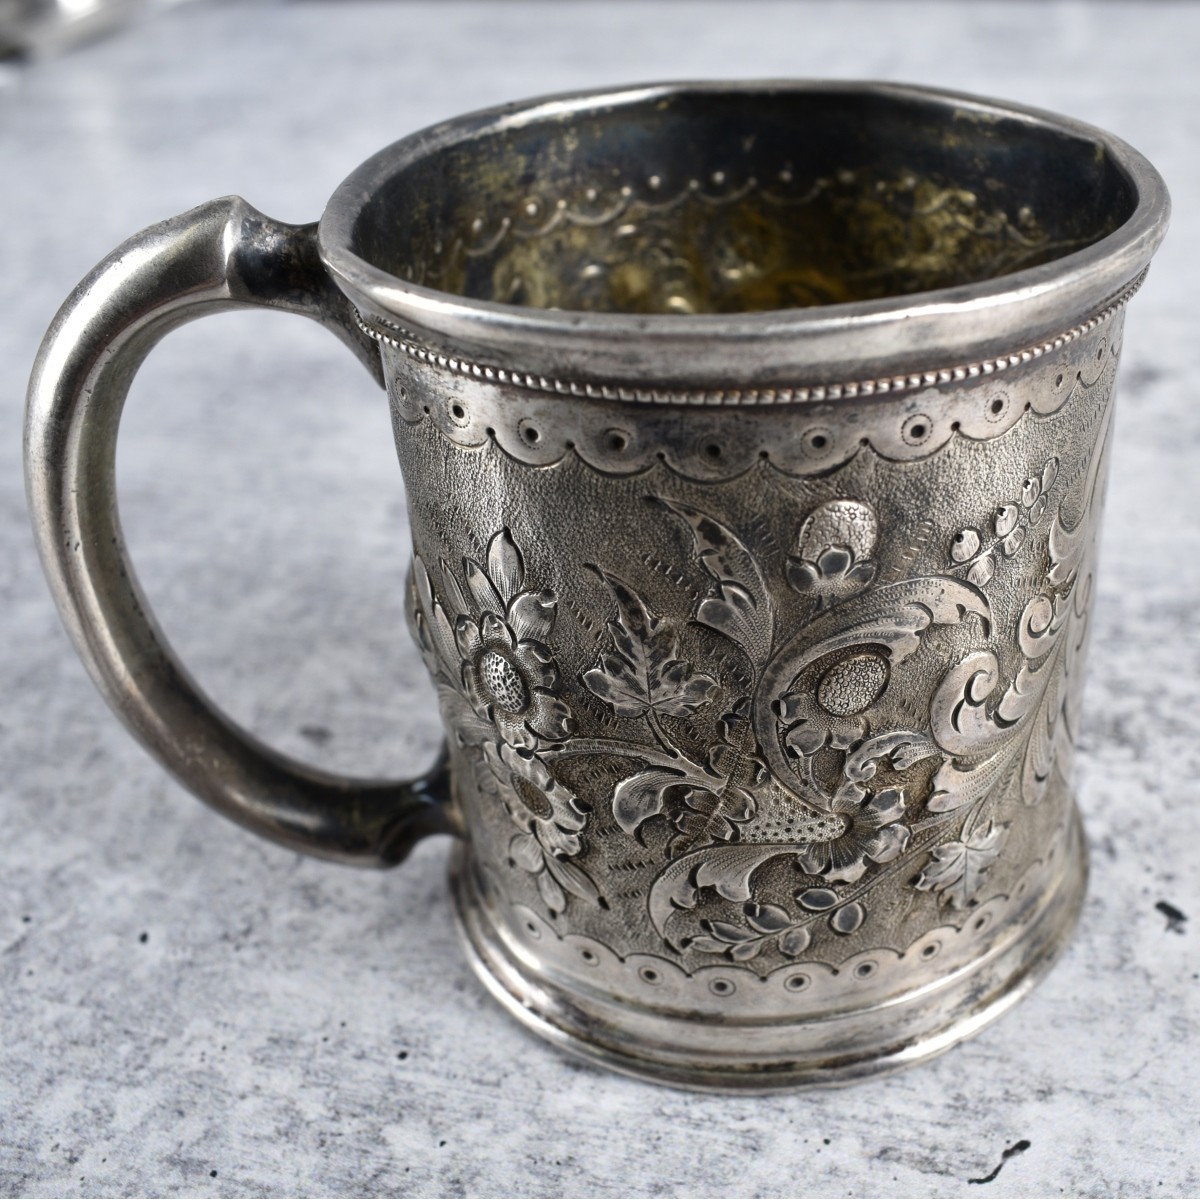 Antique Silver Cream Pitcher and Cup